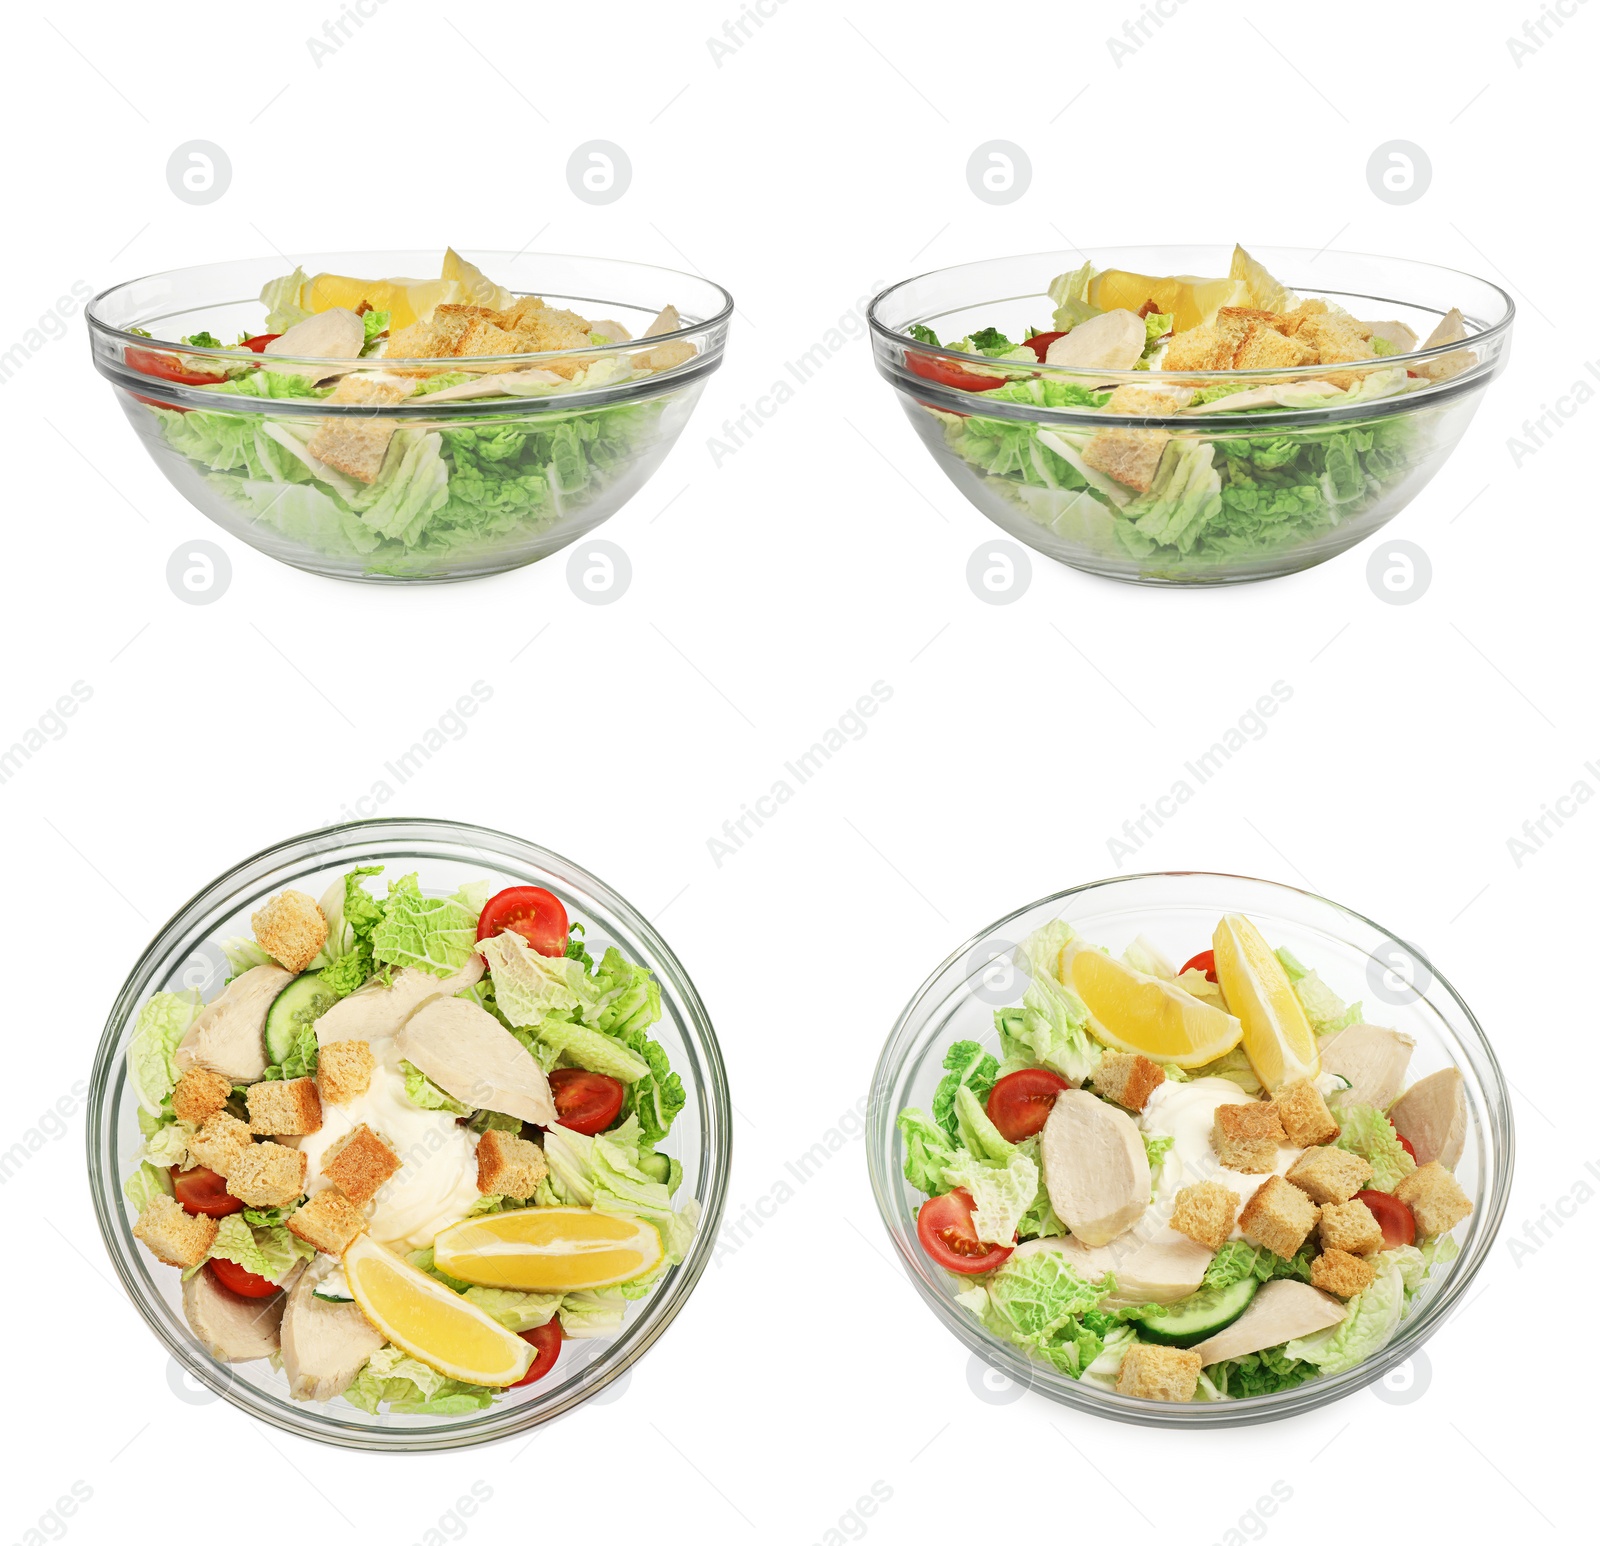 Image of Bowl of tasty salad with Chinese cabbage, meat and bread croutons on white background, different sides. Collage design